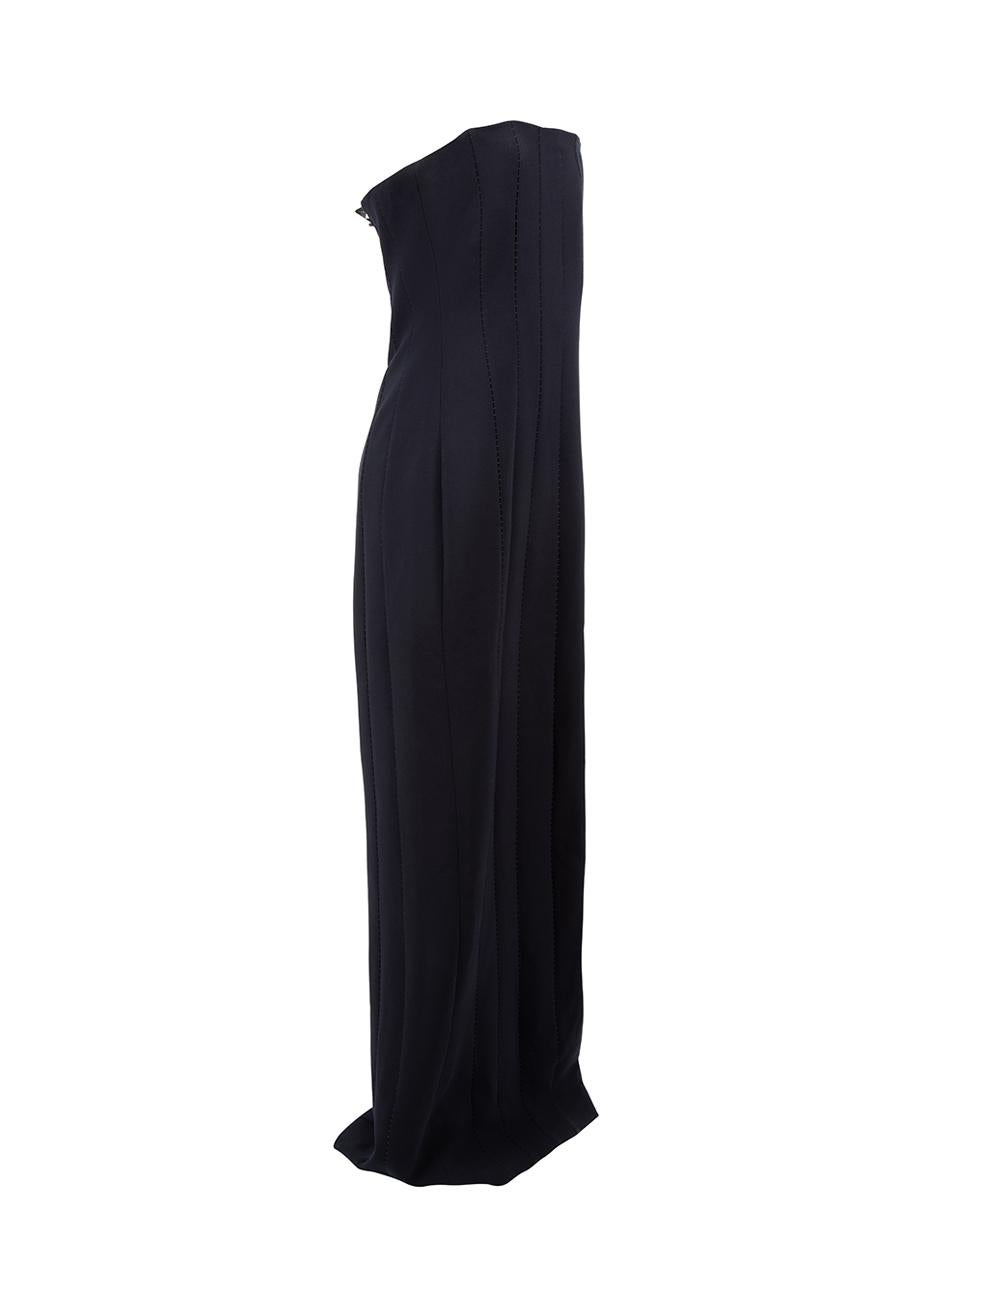 CONDITION is Very good. Minimal wear to gown is evident. Minimal loose threads to lining on this used Amanda Wakeley designer resale item. 



Details


Navy

Polyester

Maxi gown

Strapless

Stitch accent

Extreme front slit detail

Corseted

Side